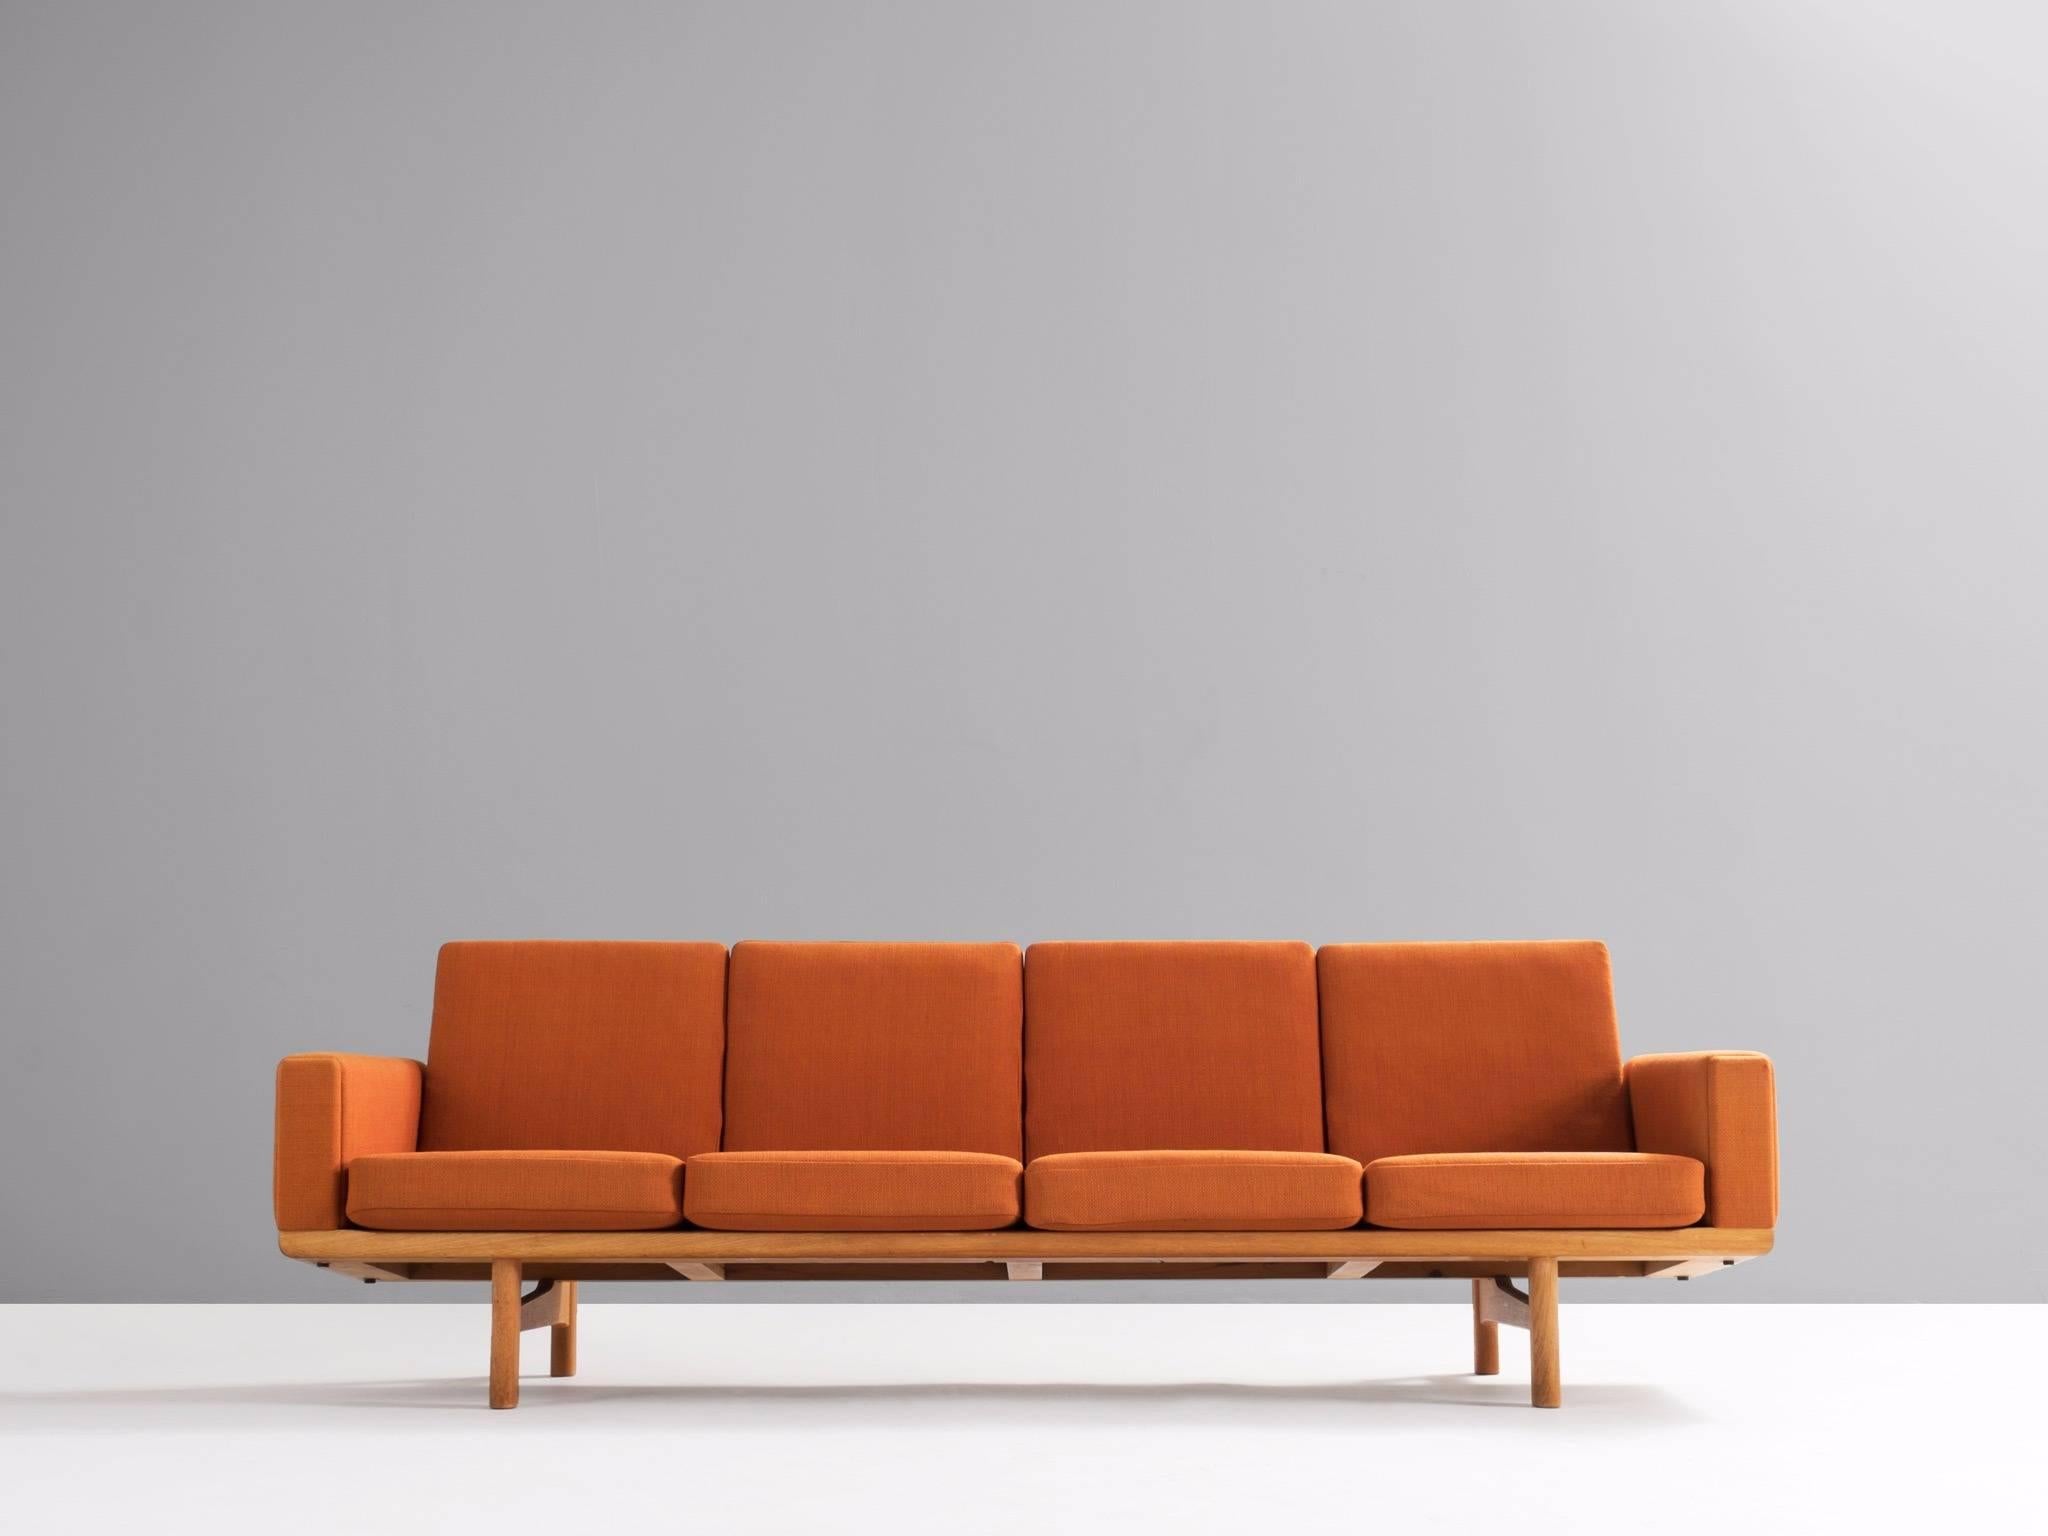 Sofa GE236/4, in oak and fabric, by Hans Wegner for GETAMA, Denmark, 1950s. 

Sofa designed by Hans Wegner for GETAMA. This sofa has a solid oak frame with real nice construction details. Due to the high legs and the low but detailed back, this